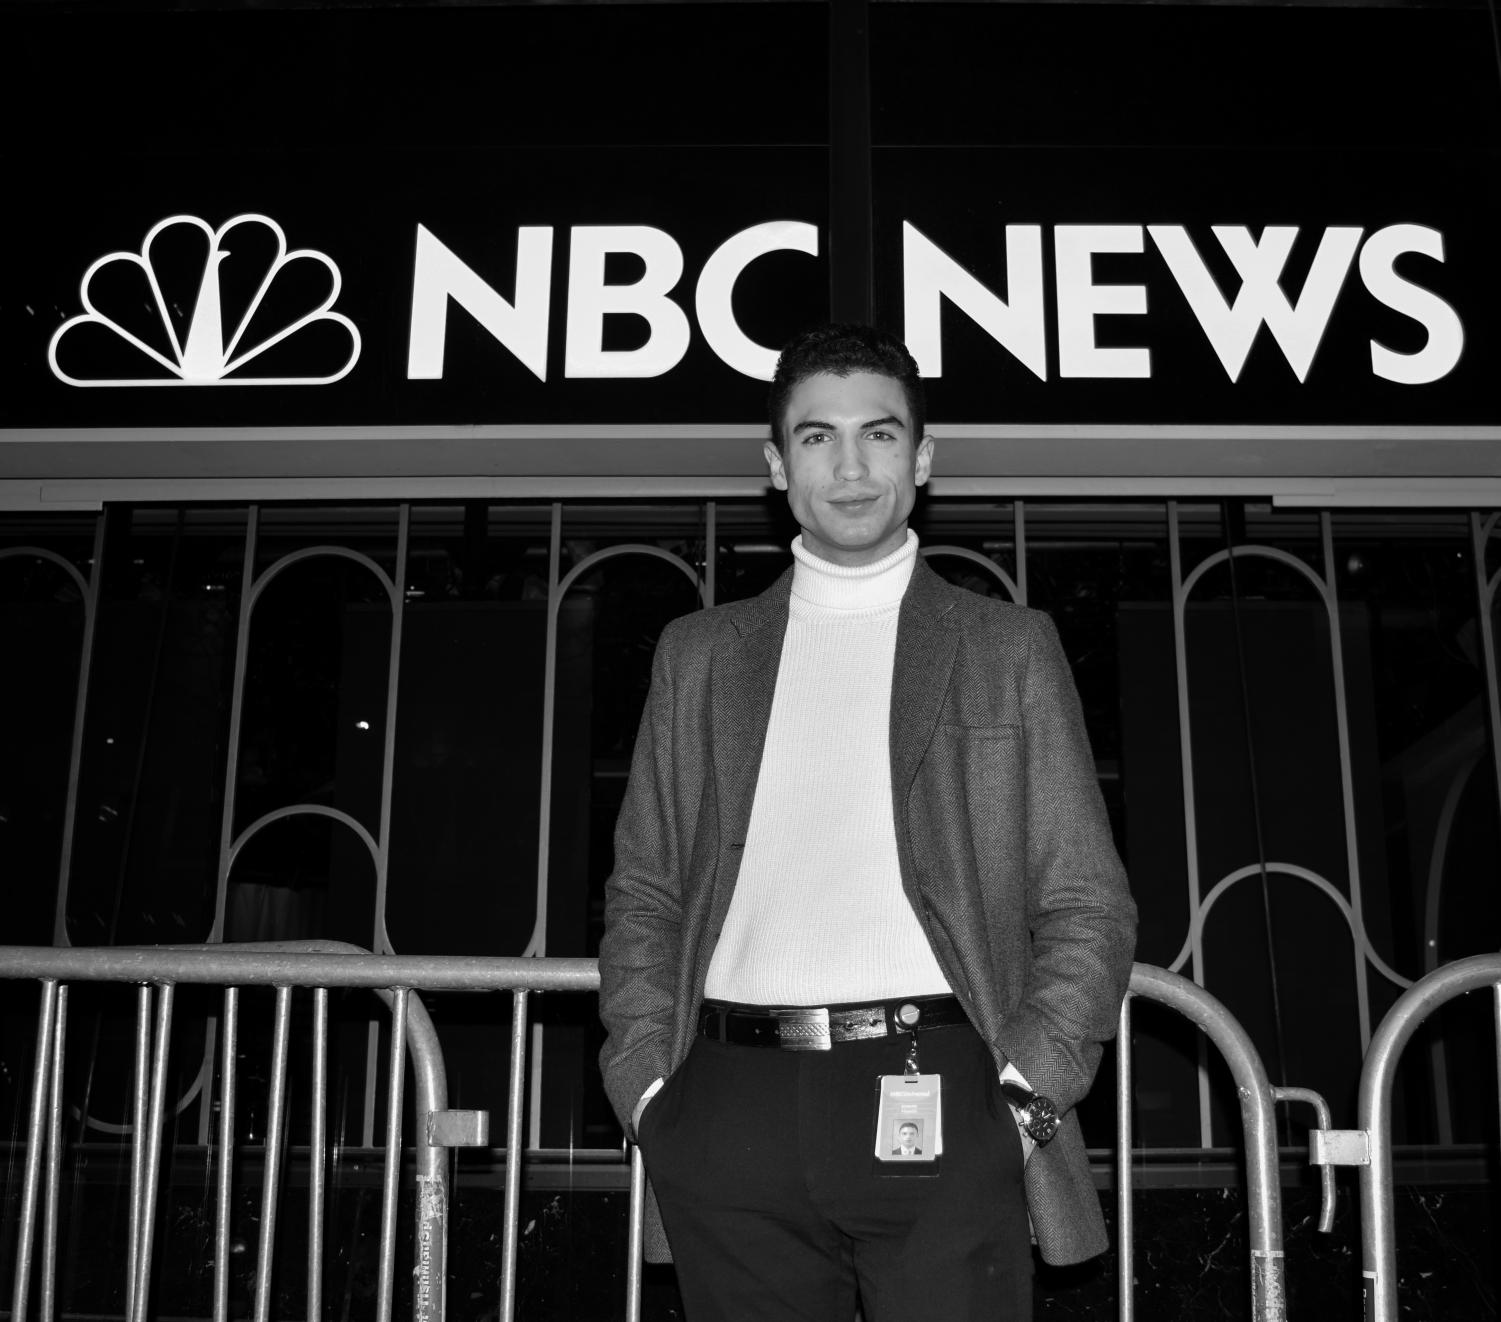 A black-and-white image of a male college student with short dark hair, a light turtle neck, dark pants with keys clipped to the belt loop, and dark blazer standing in front of an N.B.C. News sign. He smiles at the camera.